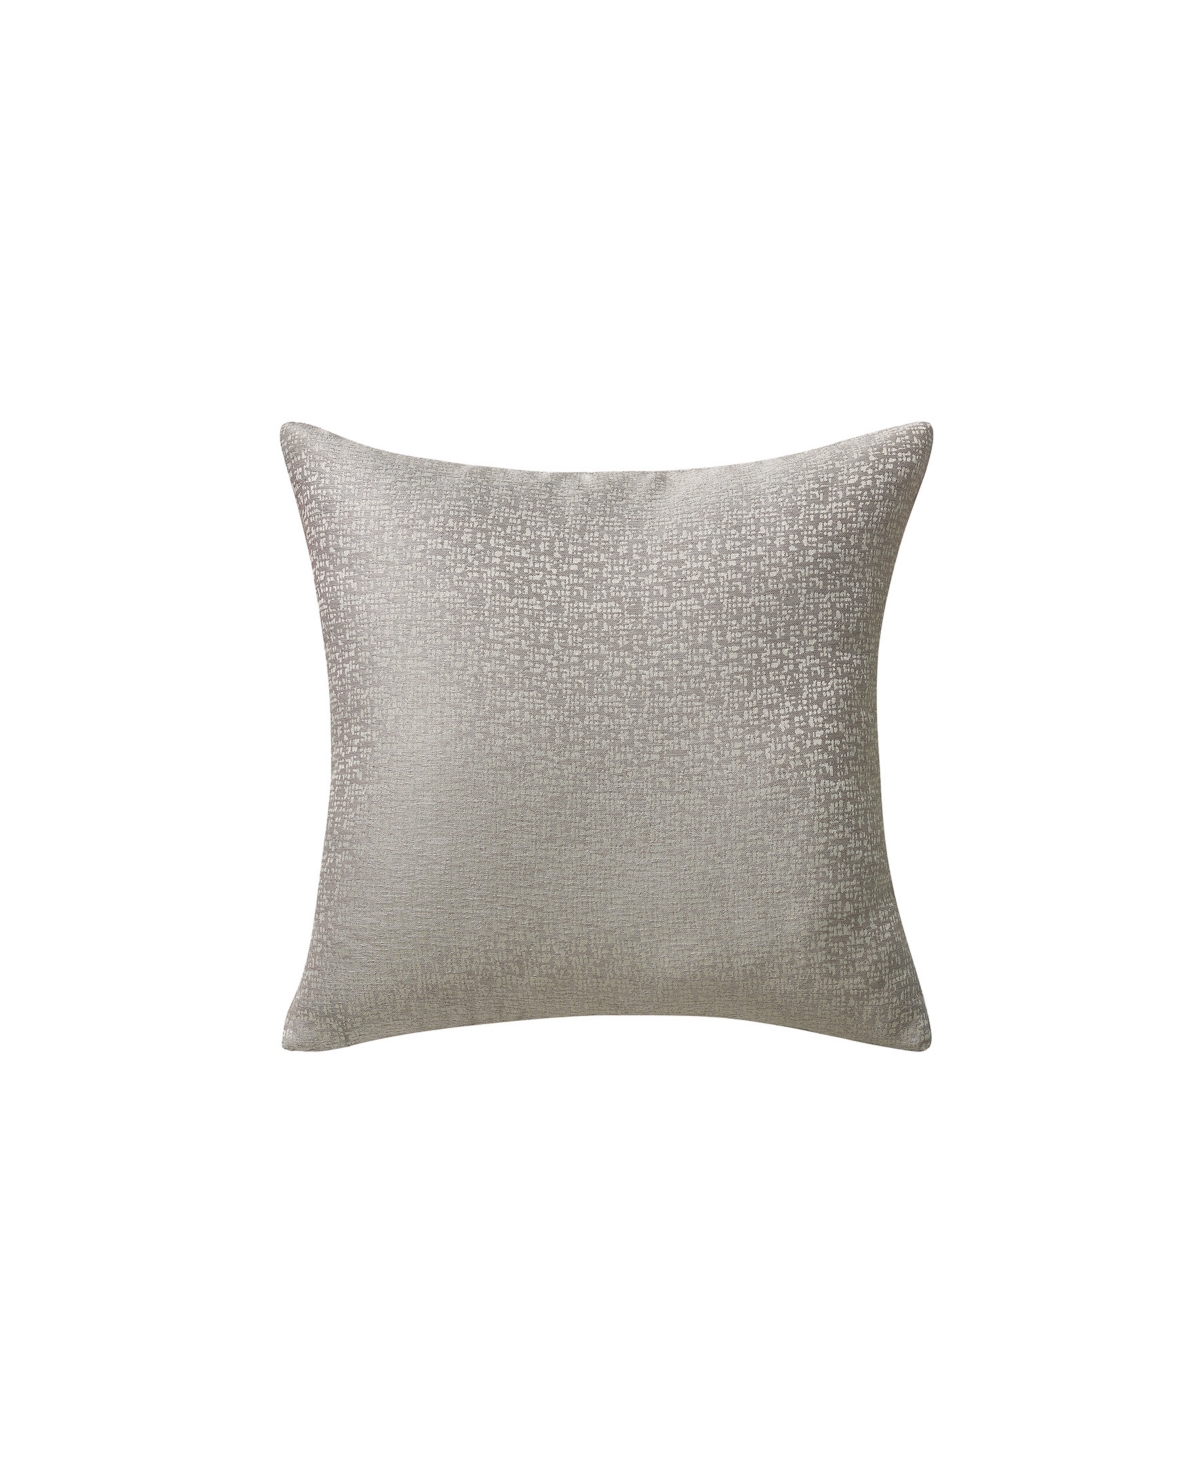 Shop Waterford Travis Set Of 2 Decorative Pillows In Mocha